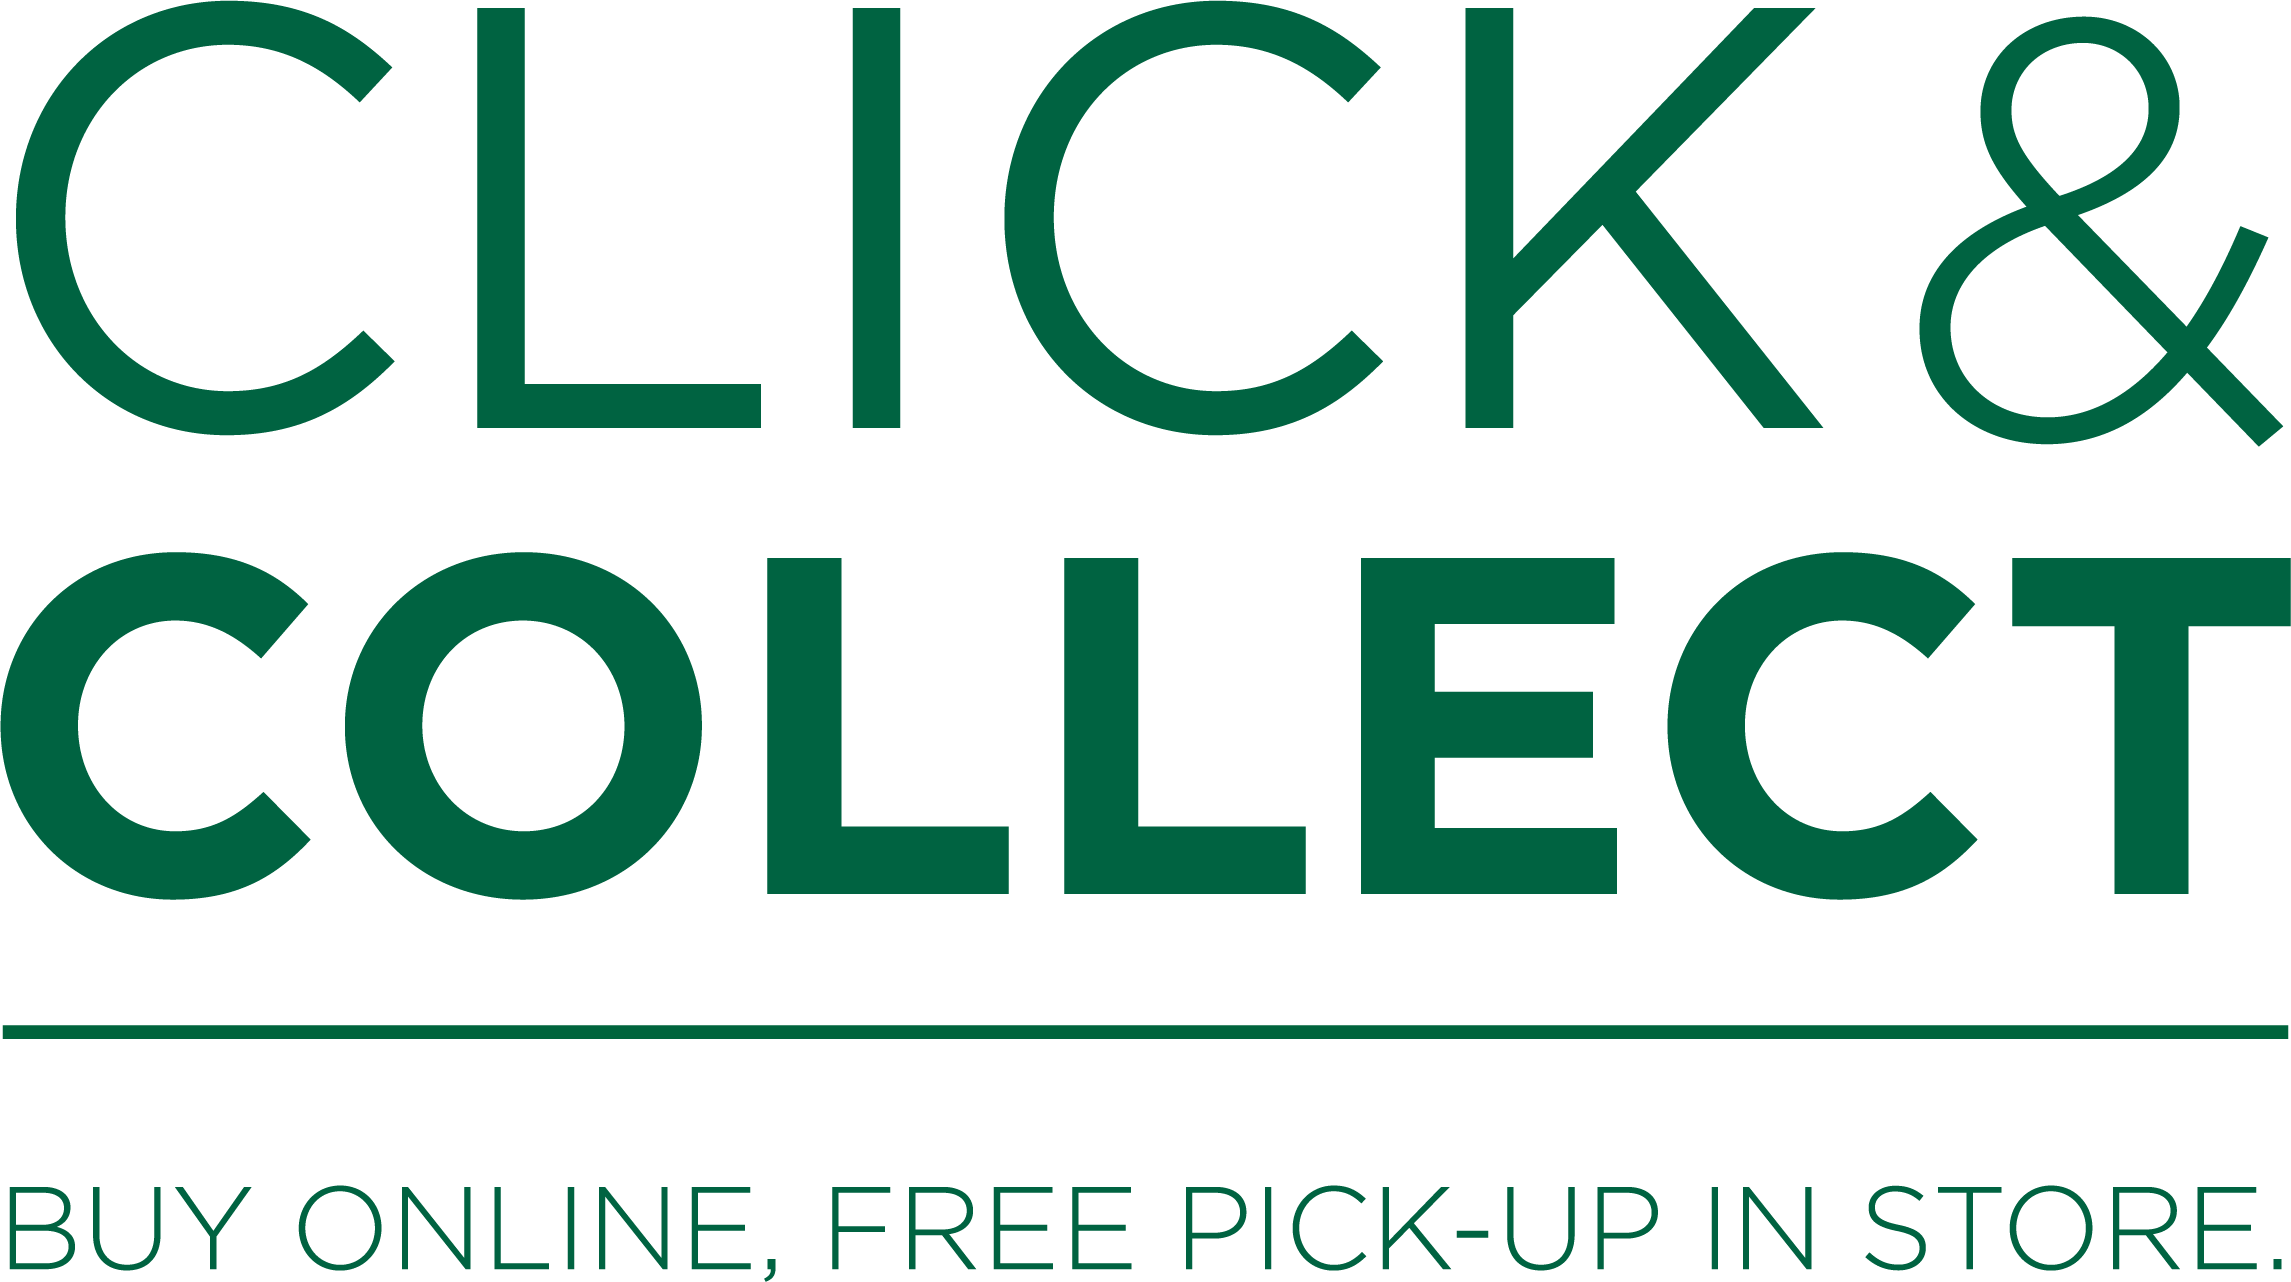 click & collect. Buy online, free pickup in store.